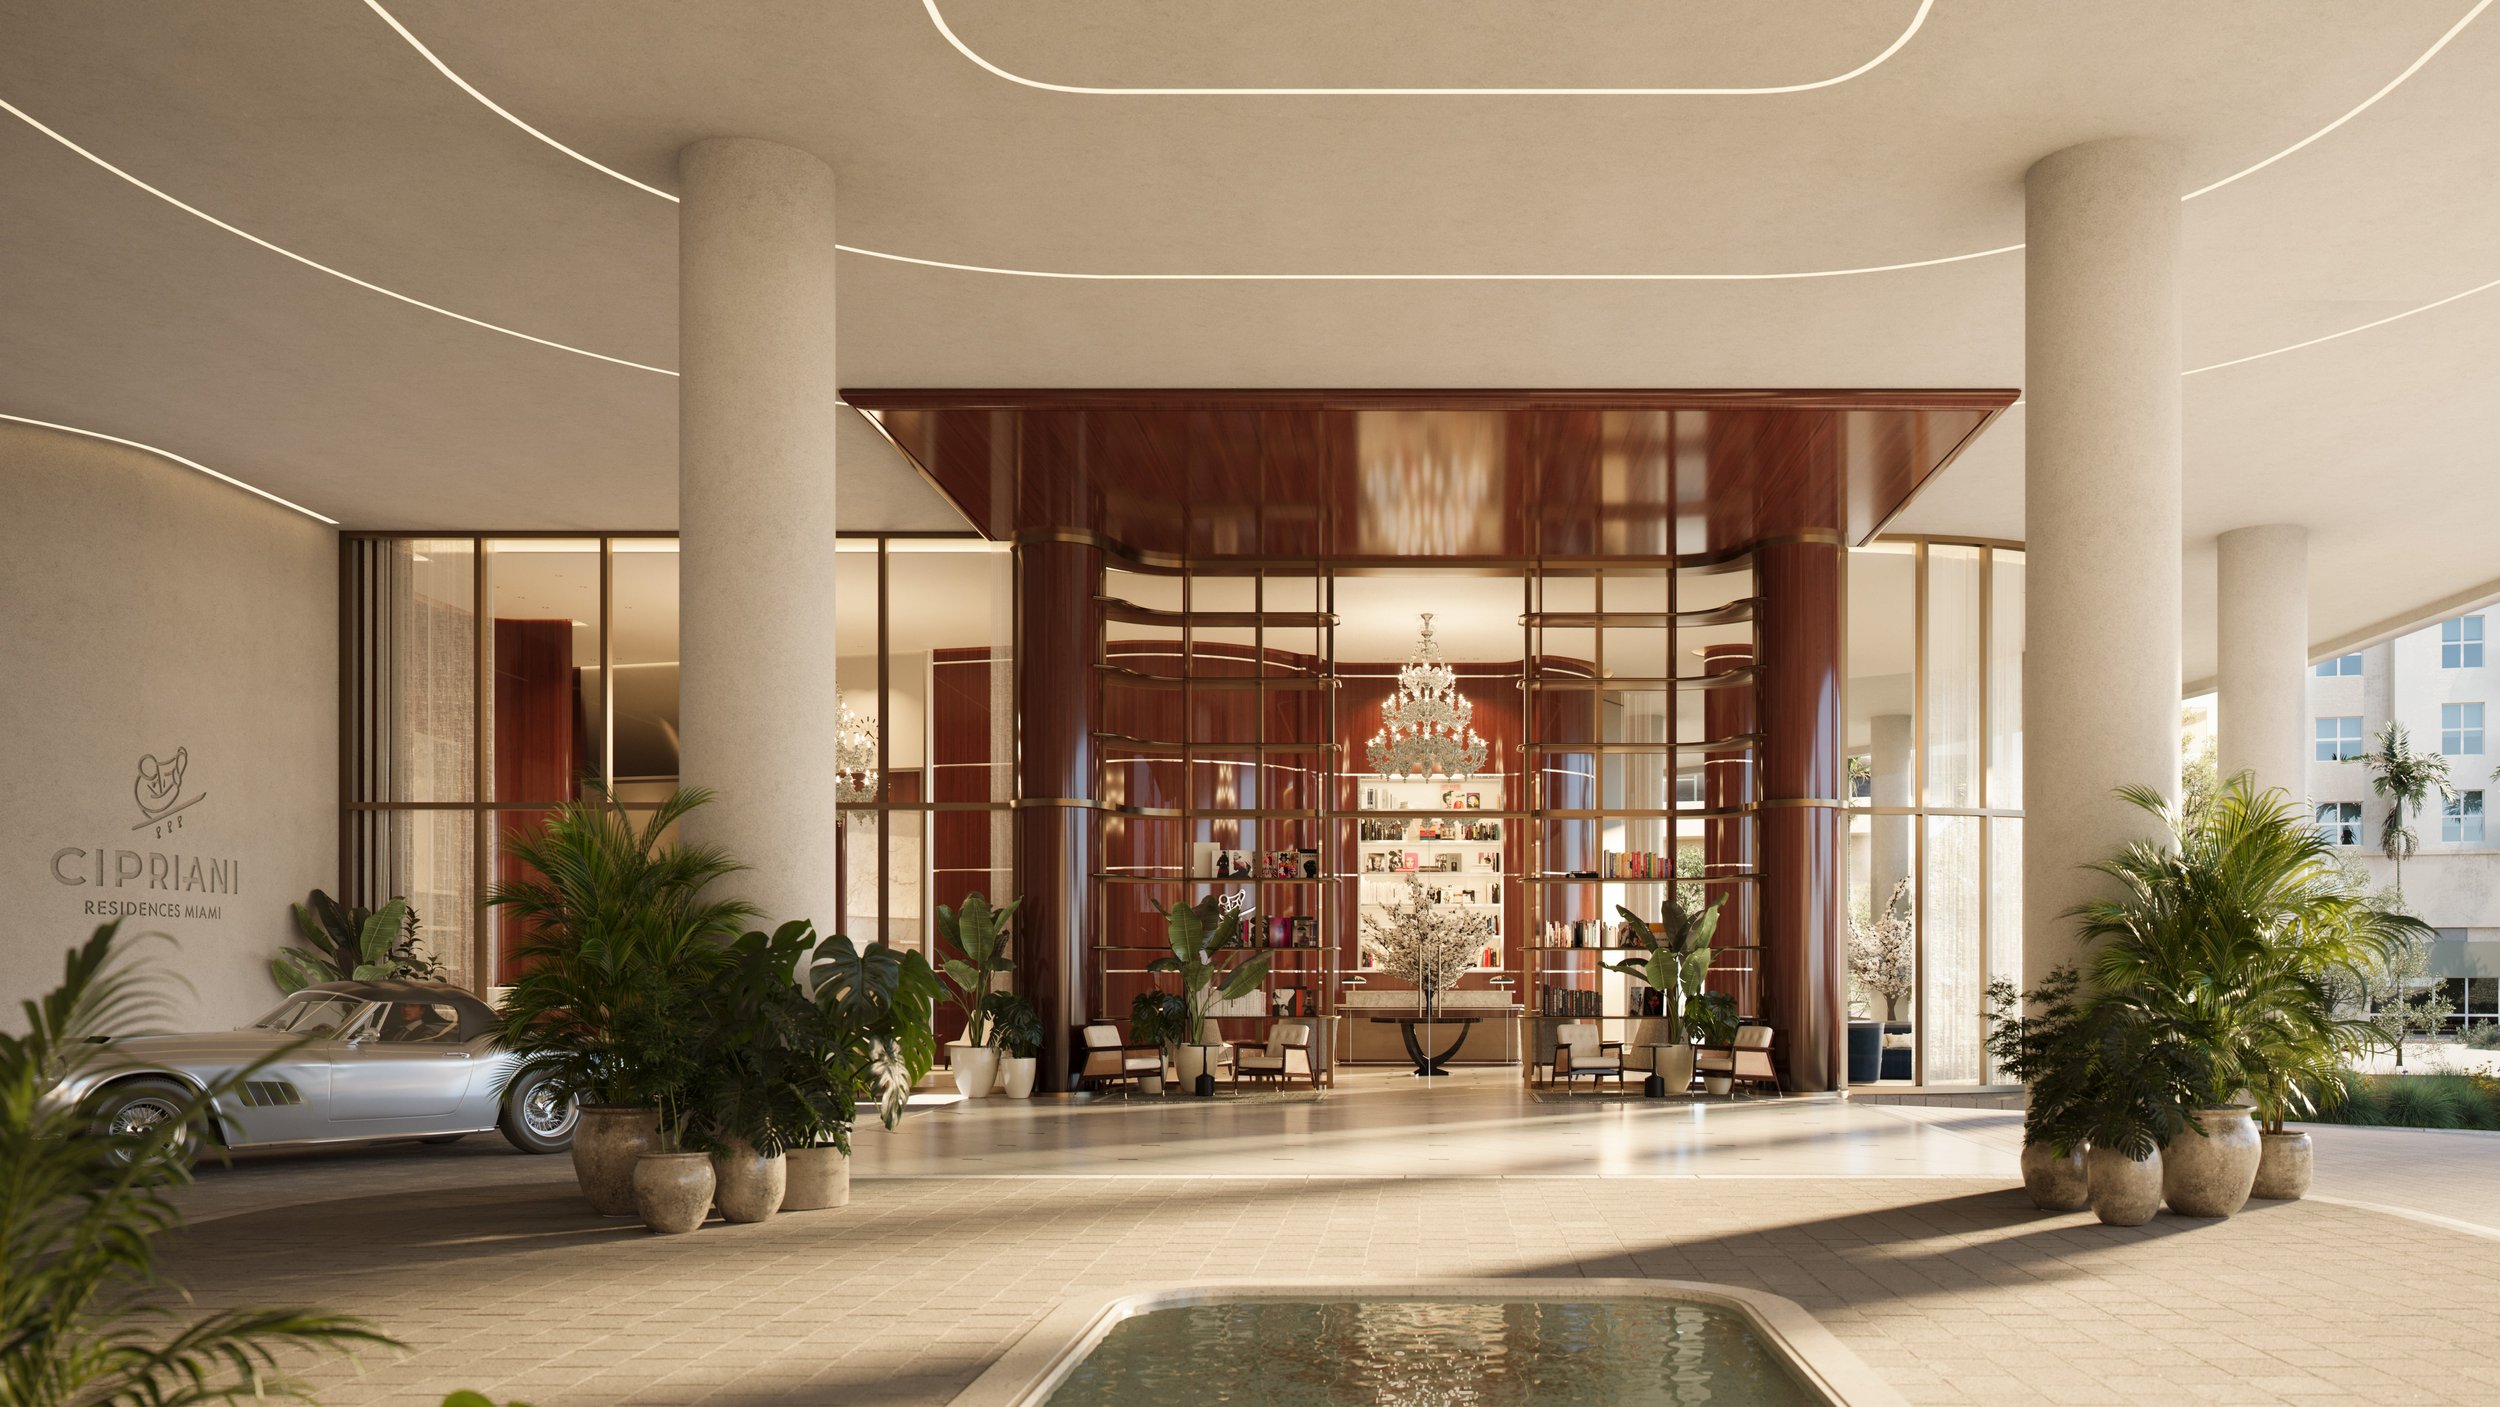 Cipriani Residences Miami Reveals First Look At Interiors By 1508 London 1.jpg